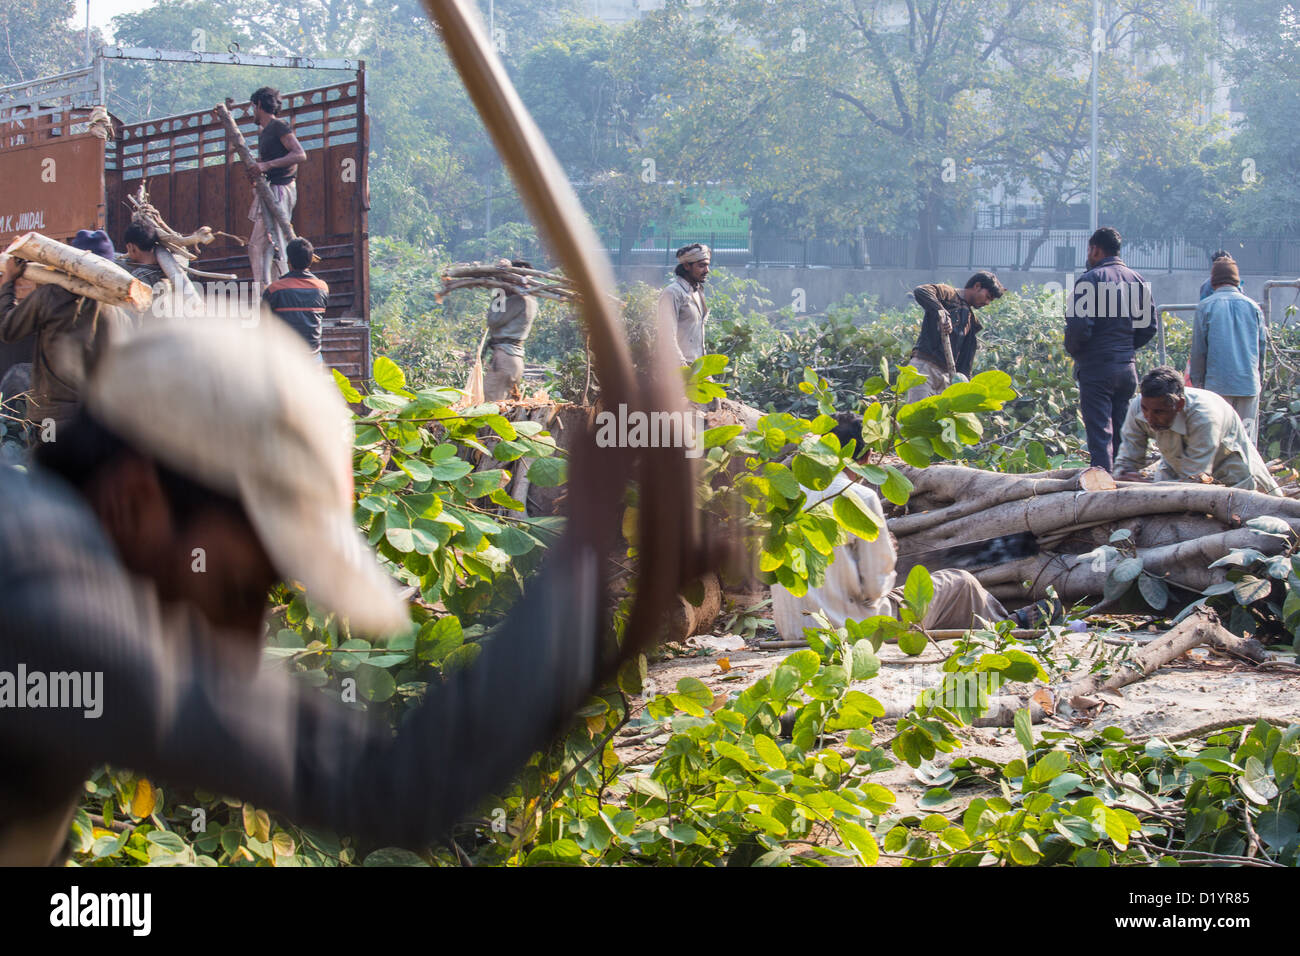 Cutting down trees and gathering wood near Delhi, India Stock Photo